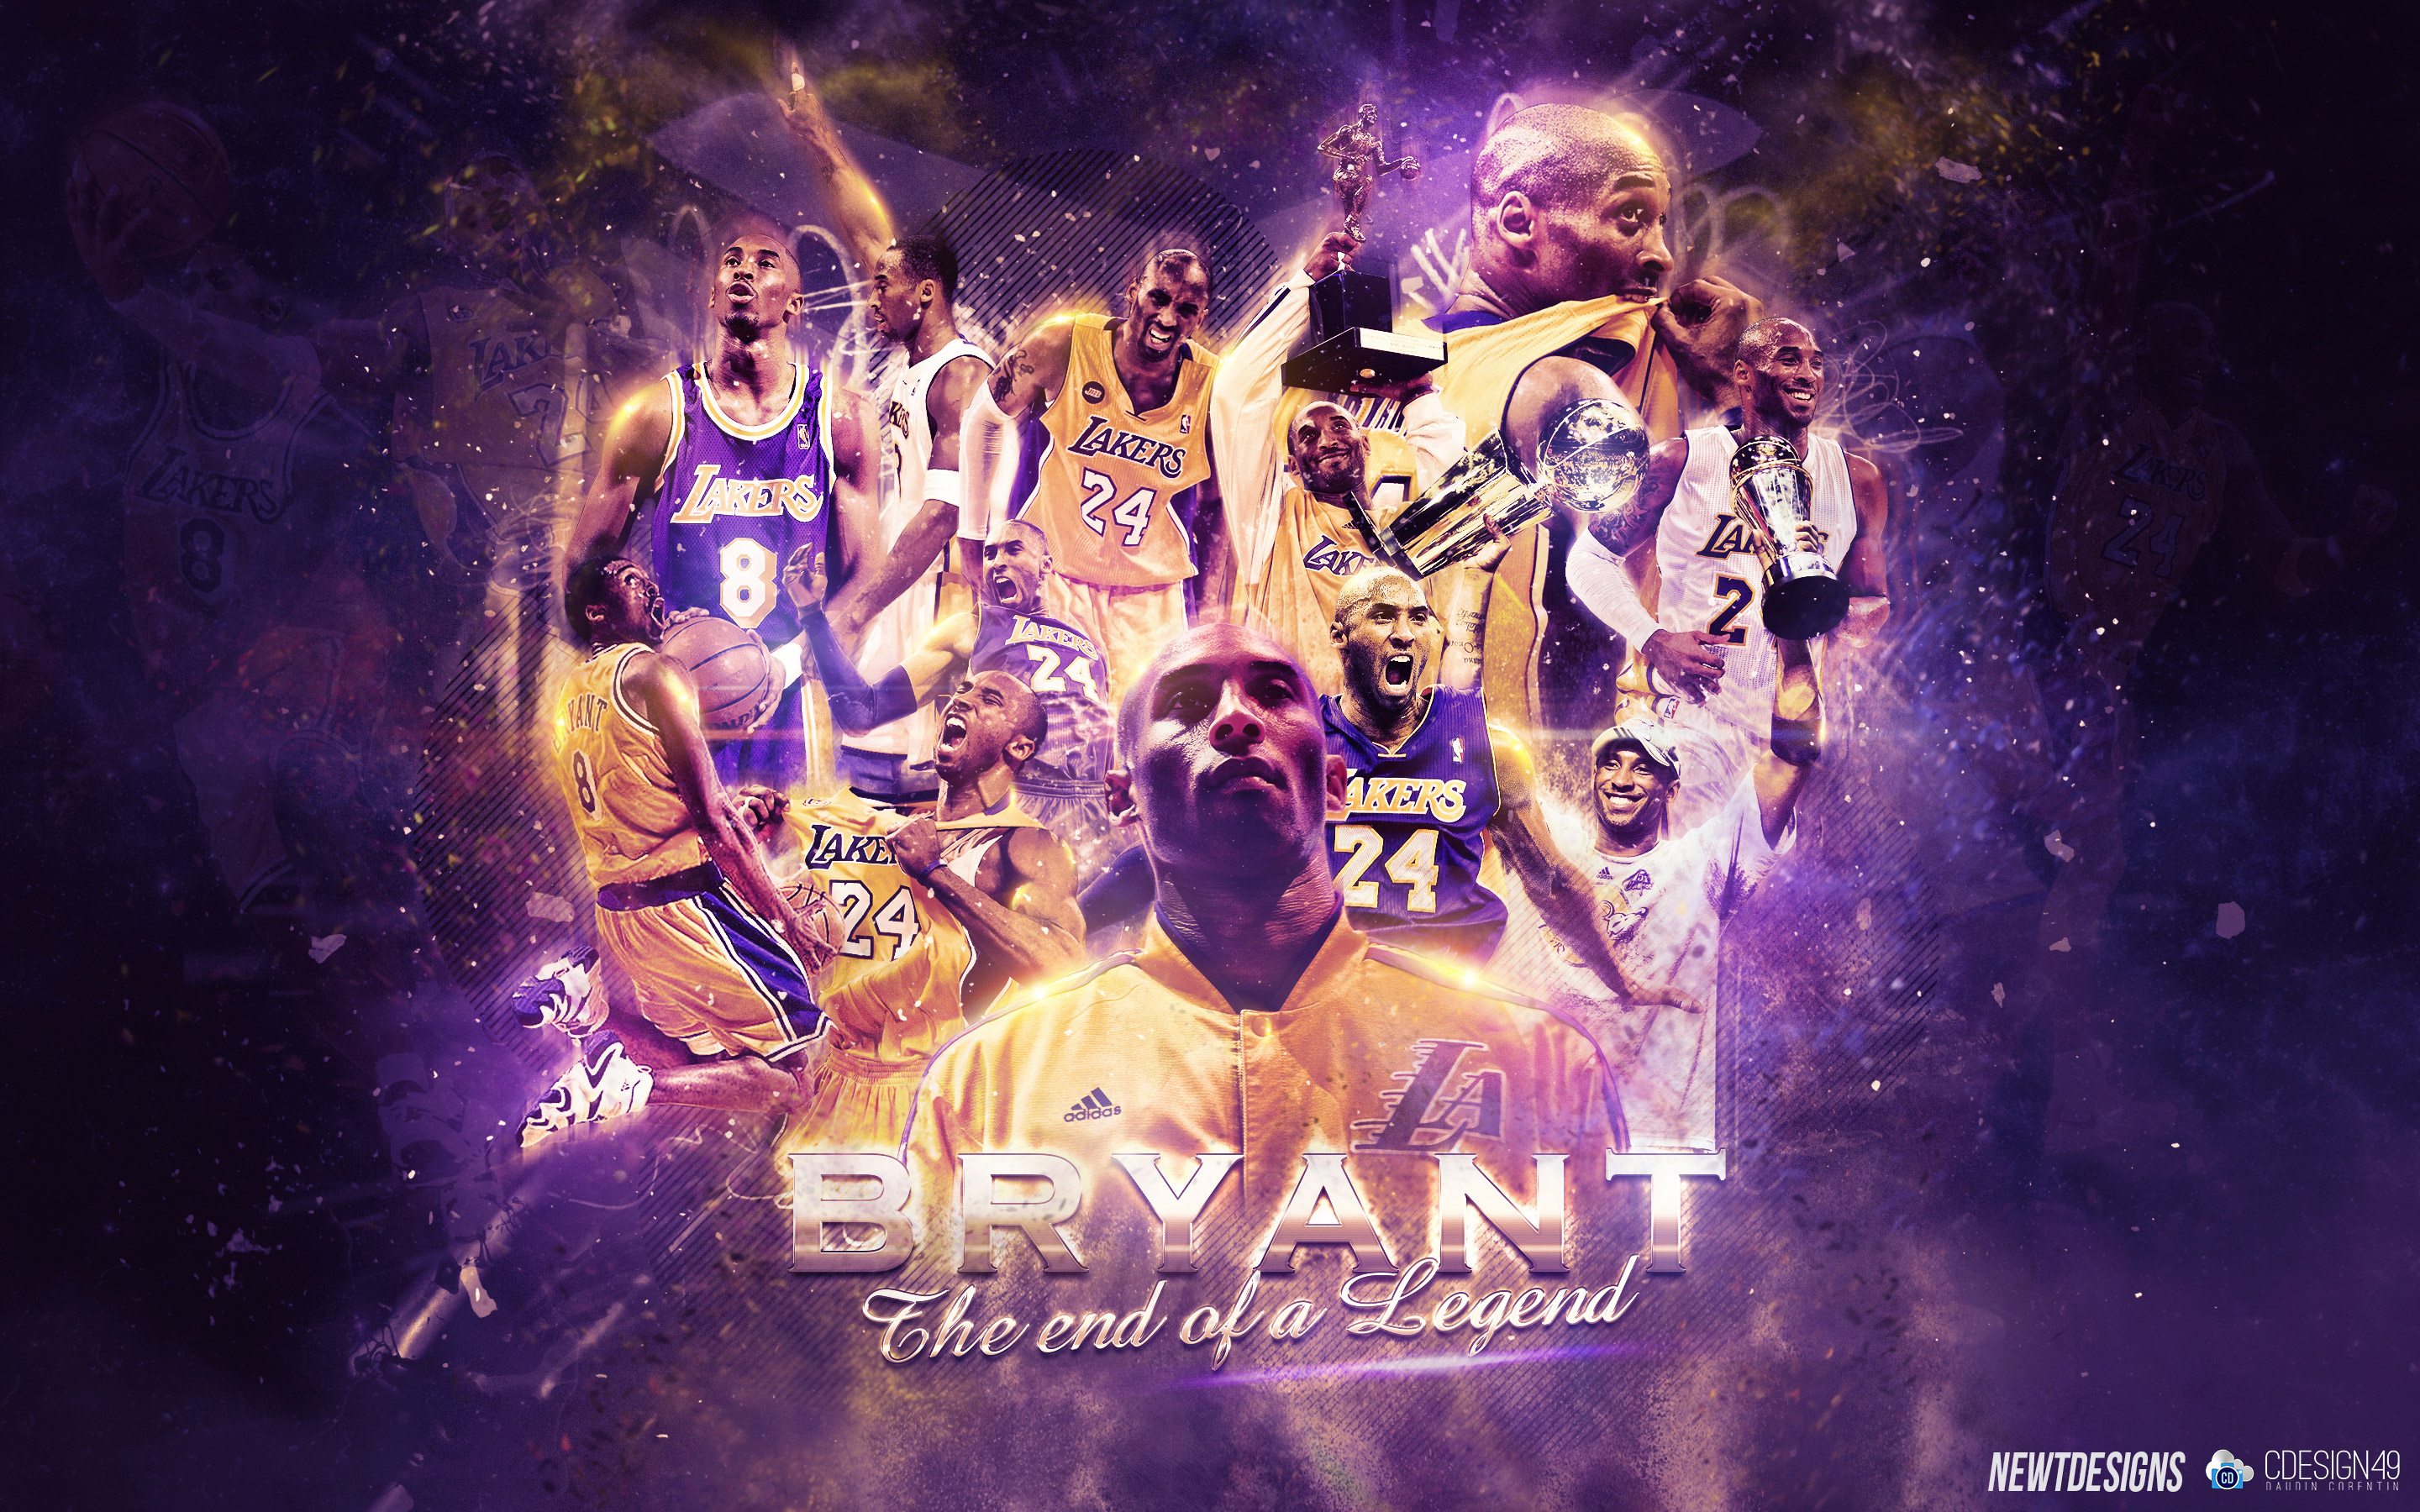 Kobe Bryant The End of a Legend Wallpaper  Basketball Wallpapers at